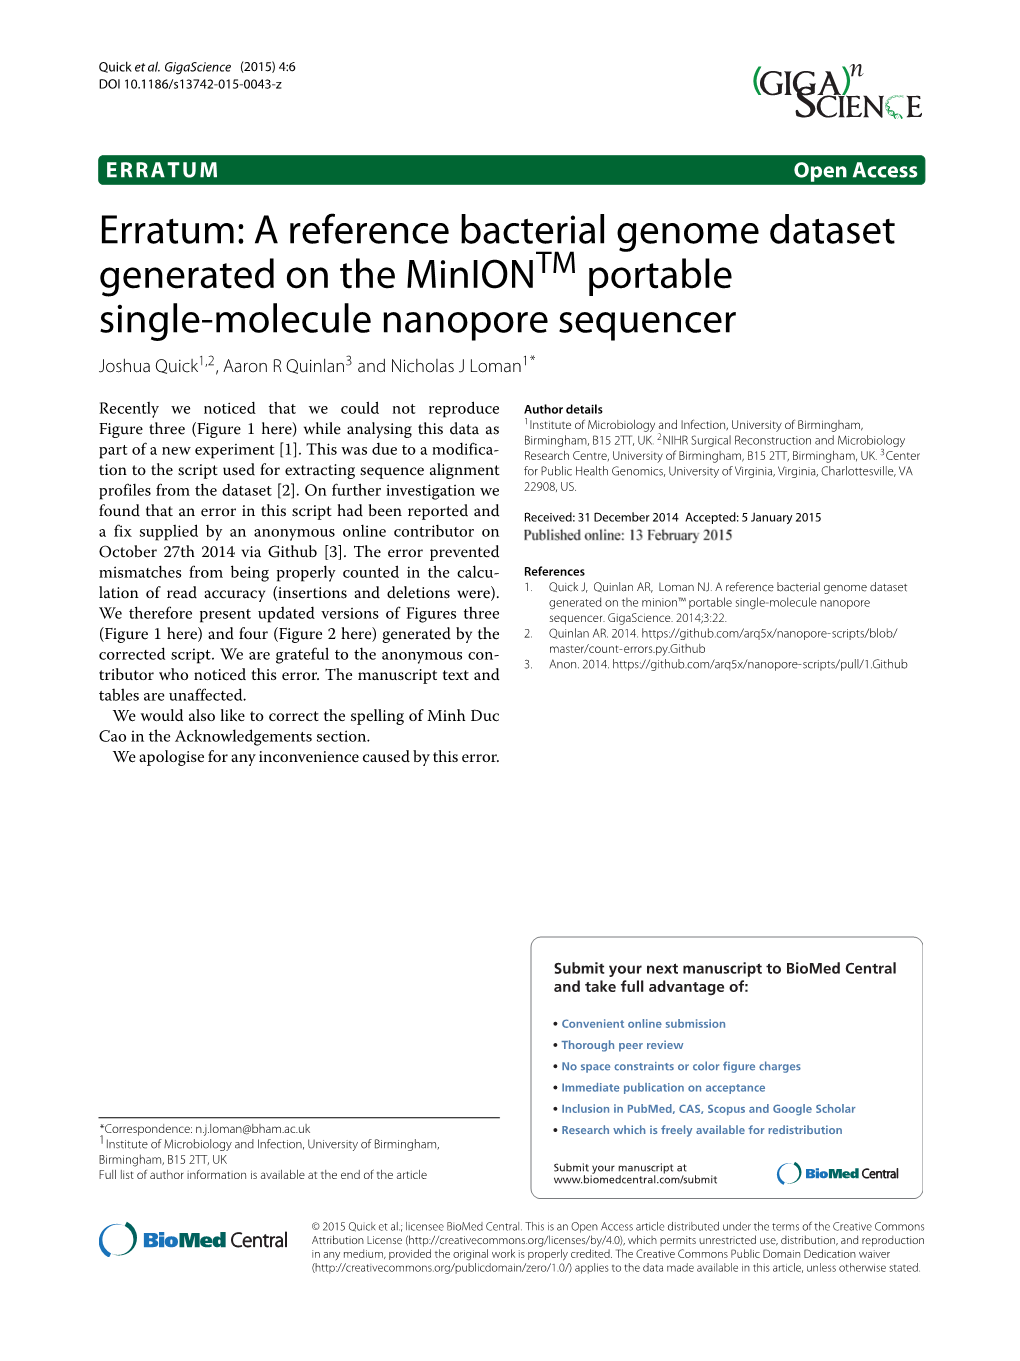 A Reference Bacterial Genome Dataset Generated on the Miniontm Portable Single-Molecule Nanopore Sequencer Joshua Quick1,2, Aaron R Quinlan3 and Nicholas J Loman1*